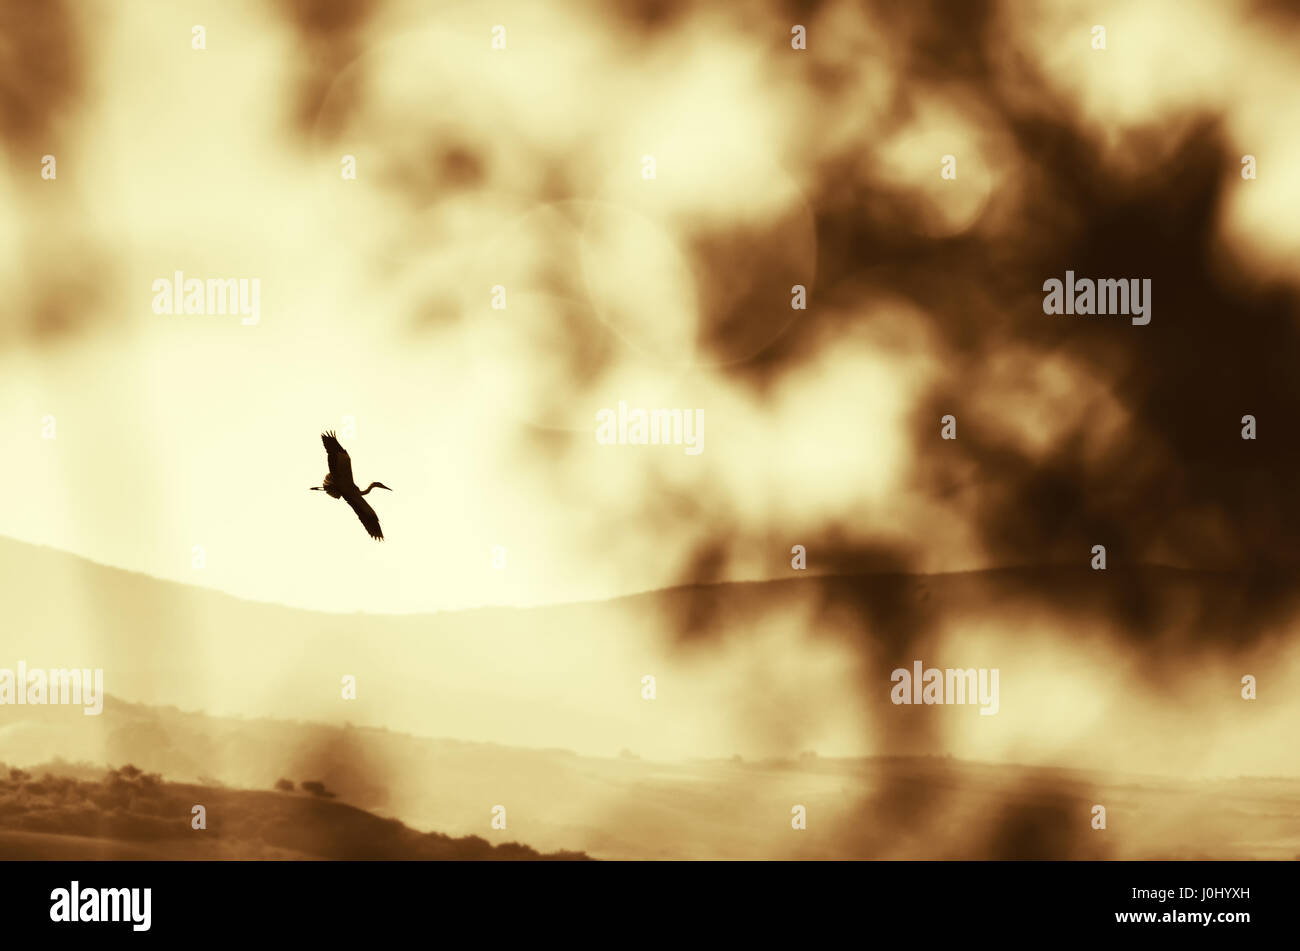 bird silhouette flying against the colorful morning sky Stock Photo